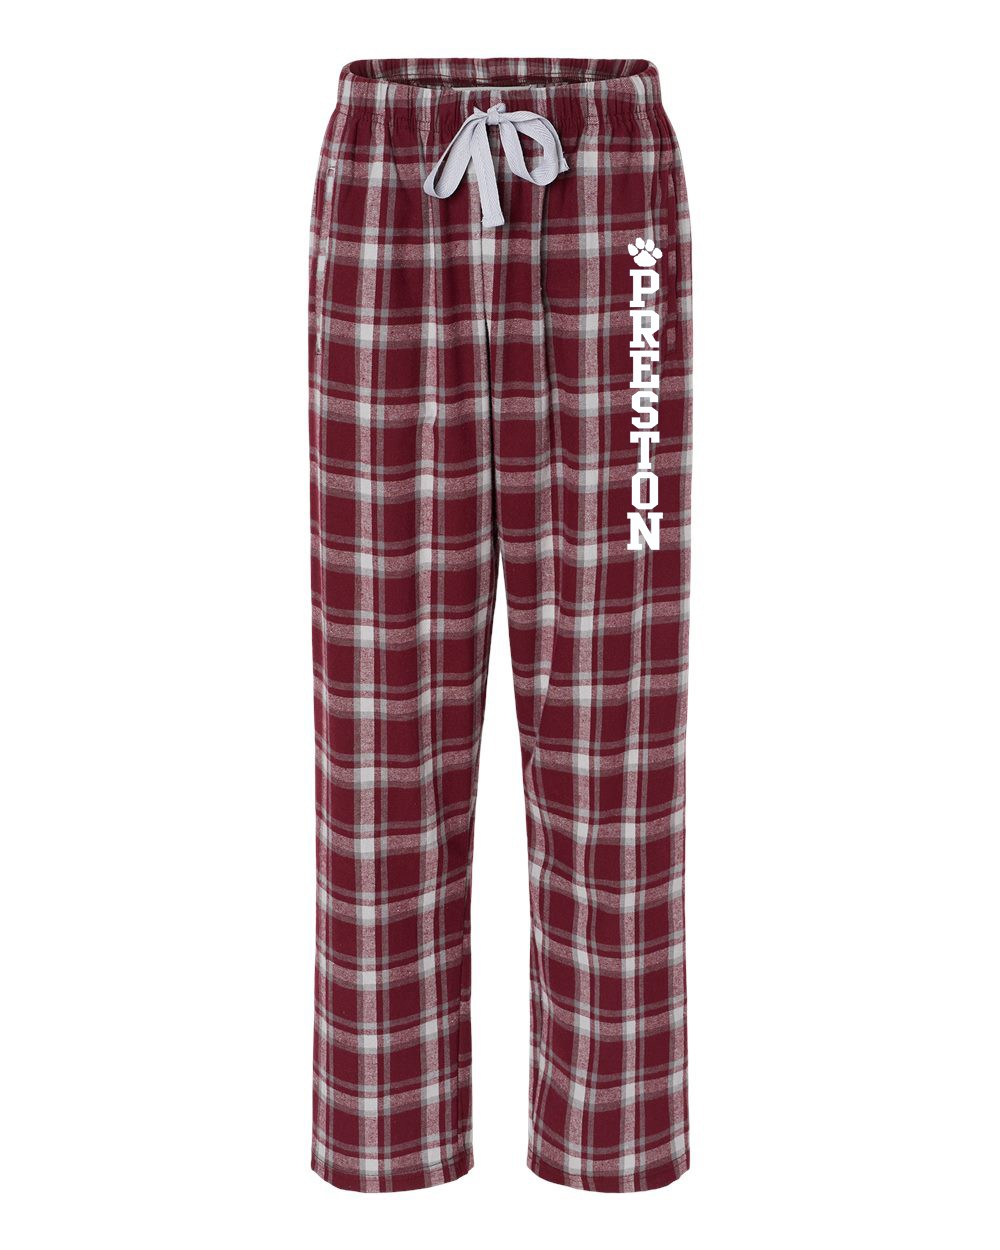 PHS Spirit Women's Pajama Pants w/ White Logo - Please Allow 2-3 Weeks for Delivery